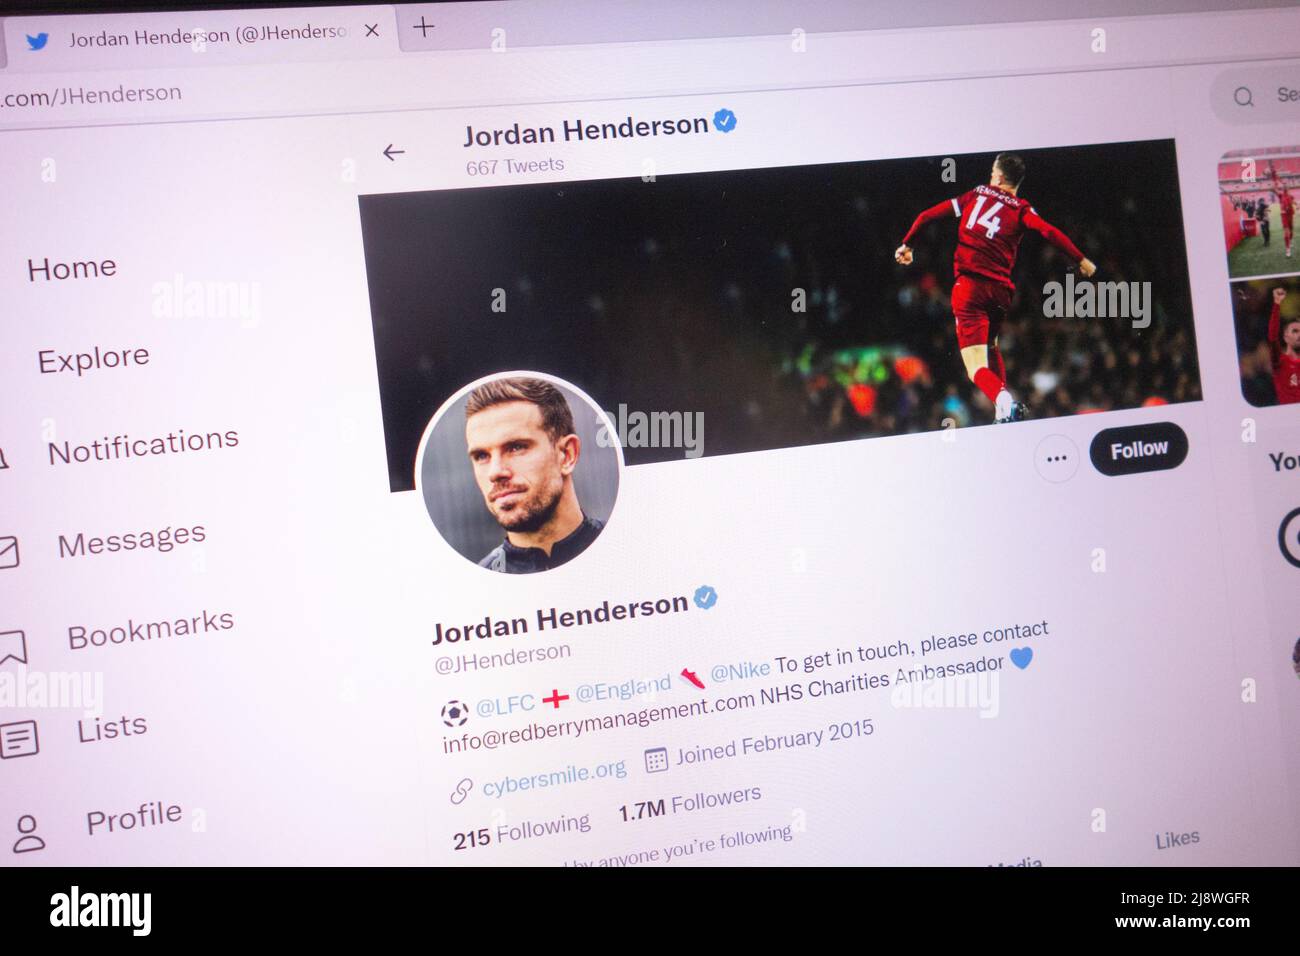 KONSKIE, POLAND - May 18, 2022: Jordan Henderson official Twitter account displayed on laptop screen Stock Photo